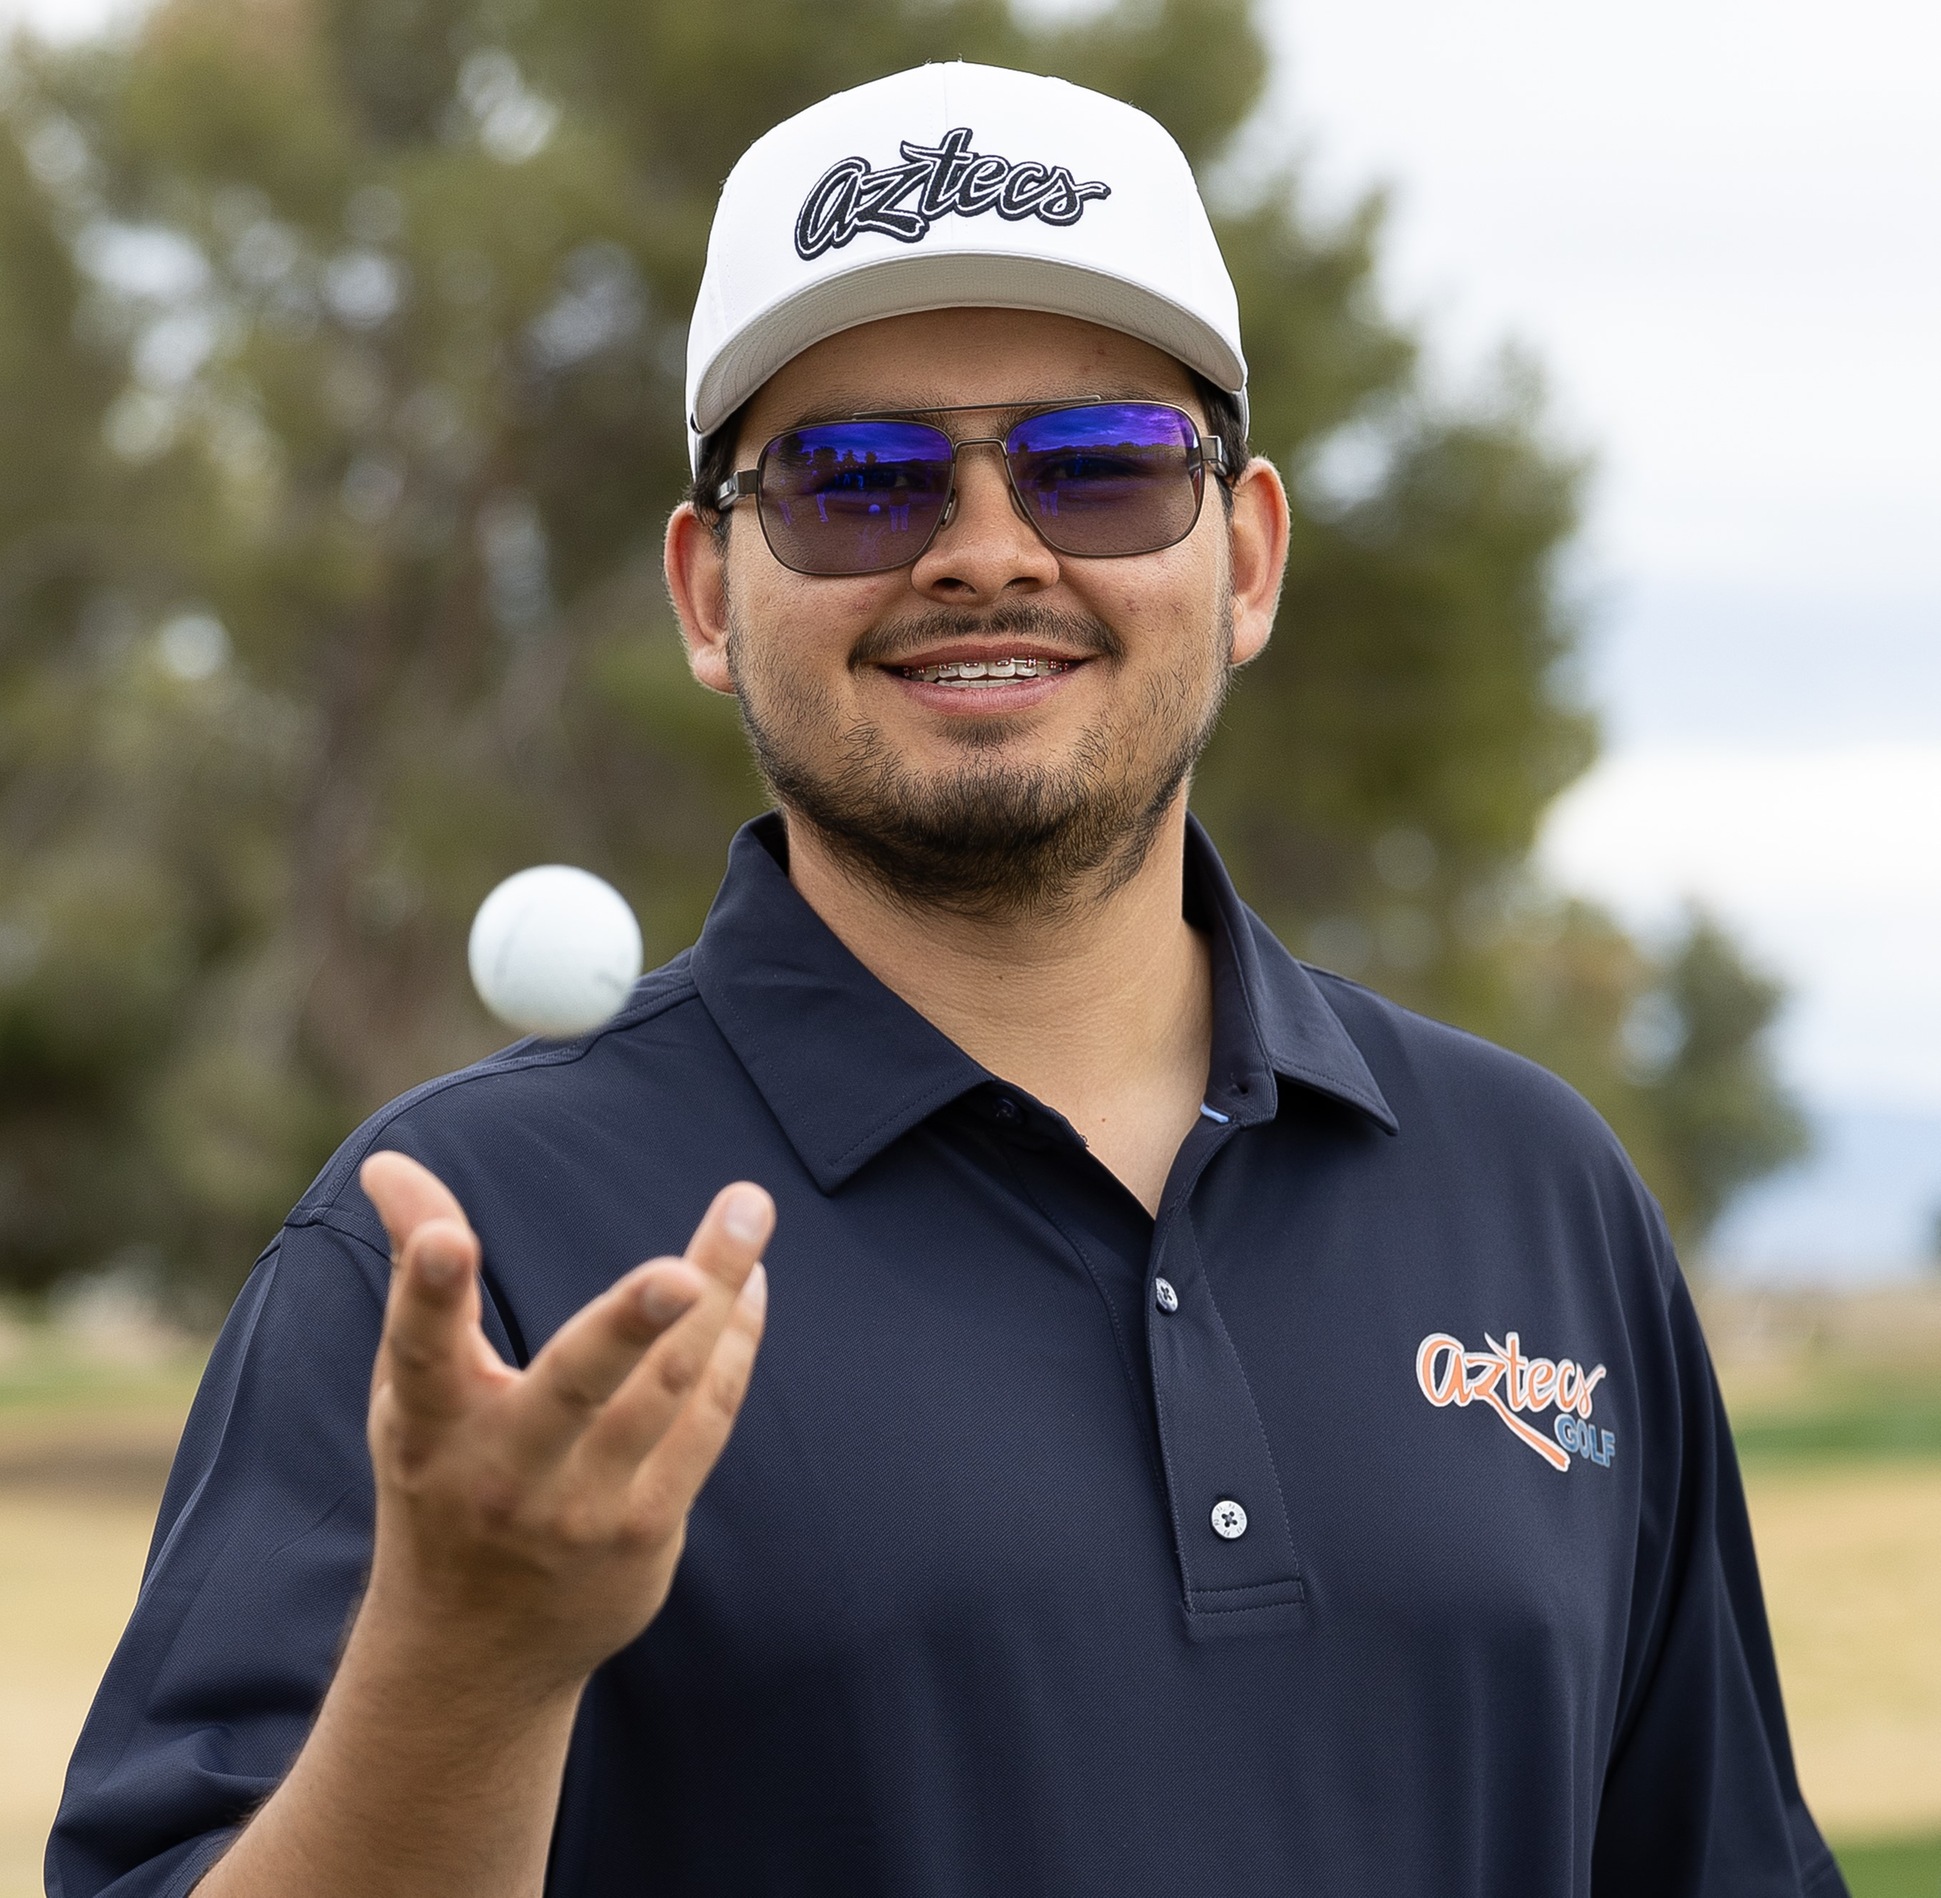 Sophomore Luis Lopez placed ninth with a two-day score of 147 (74-73) as the Aztecs Men's Golf team finished in third place at the Eastern Arizona Invitational to close out the regular season. The Aztecs will compete at the NJCAA Region I, Division I Championships on April 22-25 at the Ocotillo Golf Club in Chandler, AZ. Photo by Stephanie van Latum